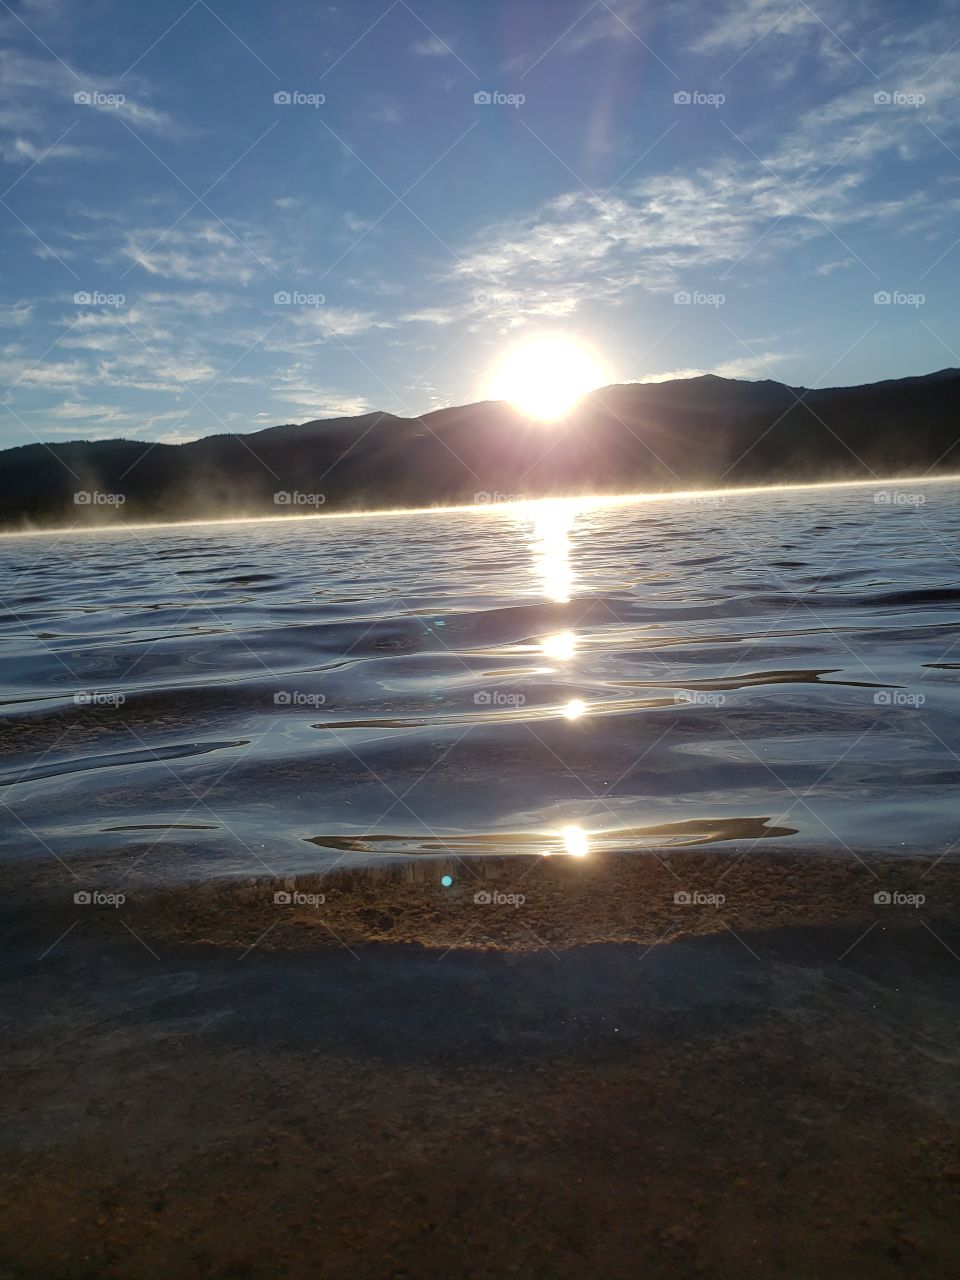 Early morning at Redfish Lake watching the sun rise. It looks beautiful as the light comes over the top of the mountains, and reflects on the crystal clear water. This is the beauty of Idaho.